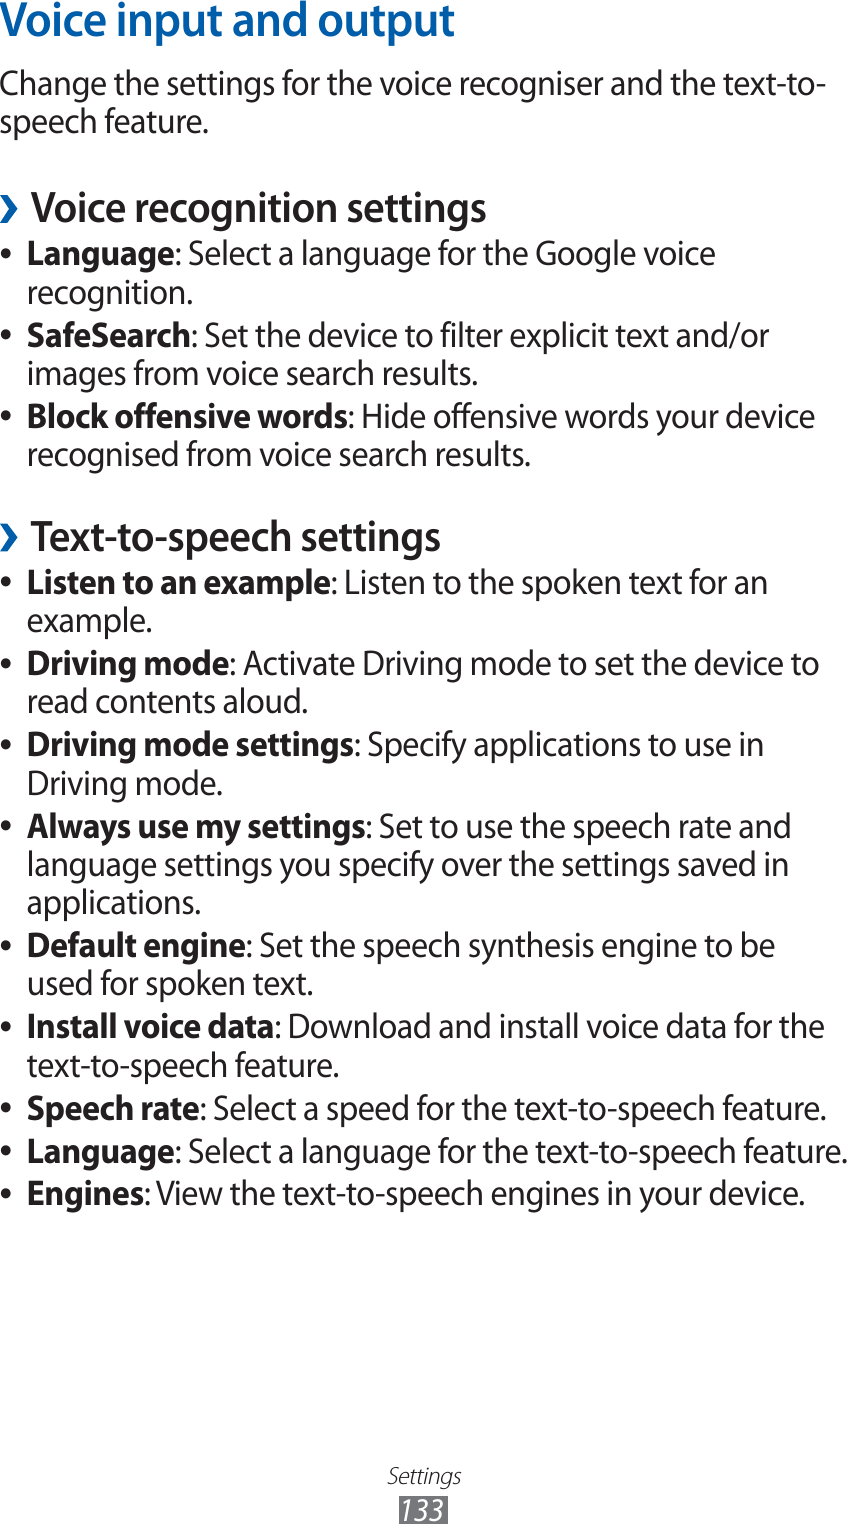 Settings133Voice input and outputChange the settings for the voice recogniser and the text-to-speech feature.Voice recognition settings ›Language ●: Select a language for the Google voice recognition.SafeSearch ●: Set the device to filter explicit text and/or images from voice search results.Block offensive words ●: Hide offensive words your device recognised from voice search results.Text-to-speech settings ›Listen to an example ●: Listen to the spoken text for an example.Driving mode ●: Activate Driving mode to set the device to read contents aloud.Driving mode settings ●: Specify applications to use in Driving mode.Always use my settings ●: Set to use the speech rate and language settings you specify over the settings saved in applications.Default engine ●: Set the speech synthesis engine to be used for spoken text.Install voice data ●: Download and install voice data for the text-to-speech feature.Speech rate ●: Select a speed for the text-to-speech feature.Language ●: Select a language for the text-to-speech feature.Engines ●: View the text-to-speech engines in your device.